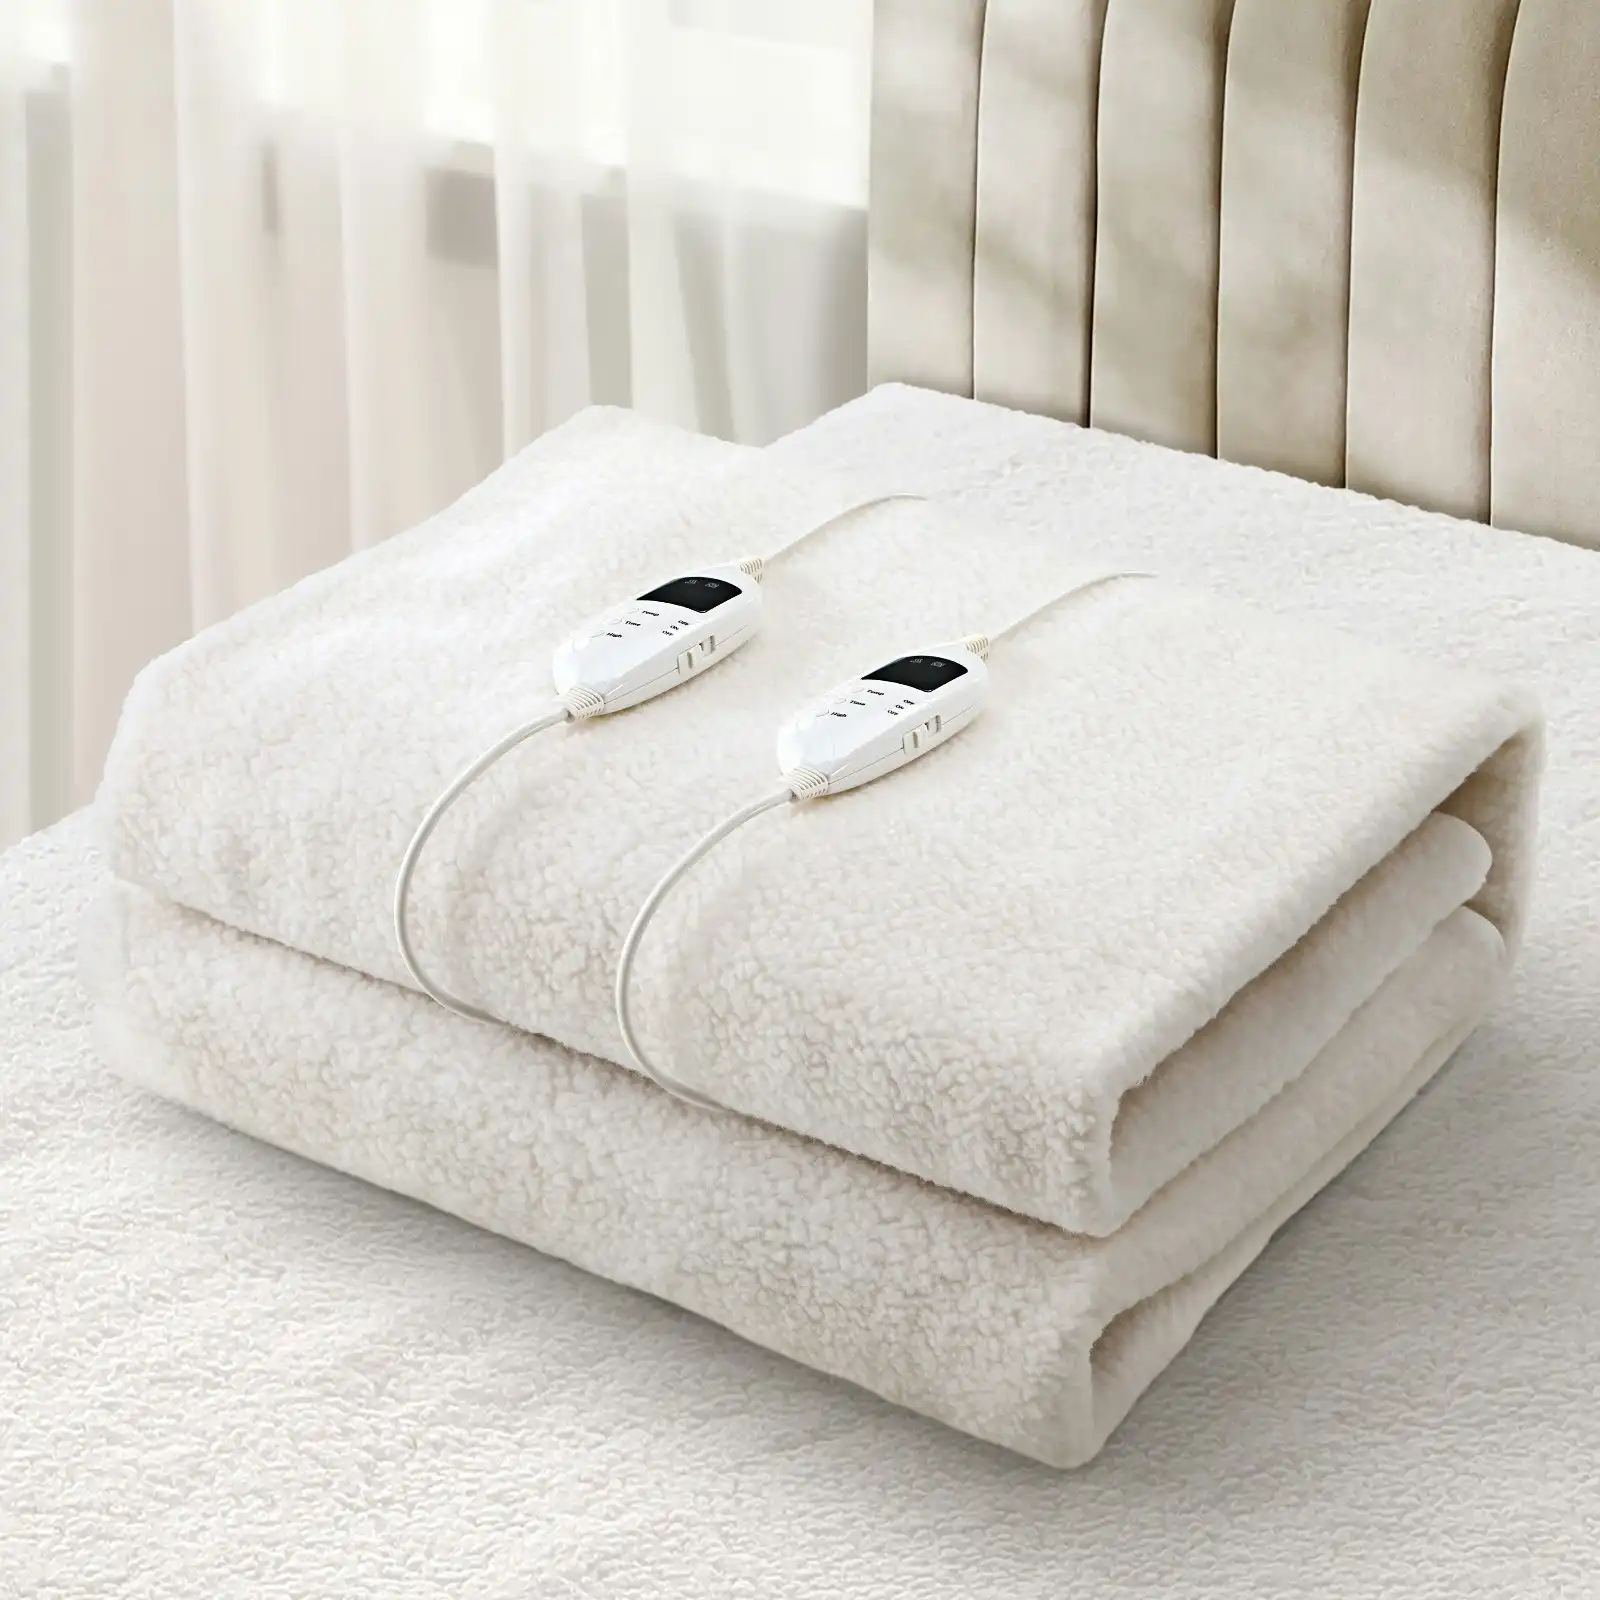 Bedra Electric Blanket Fleece Heated Fully Fitted Winter Pad Washable King